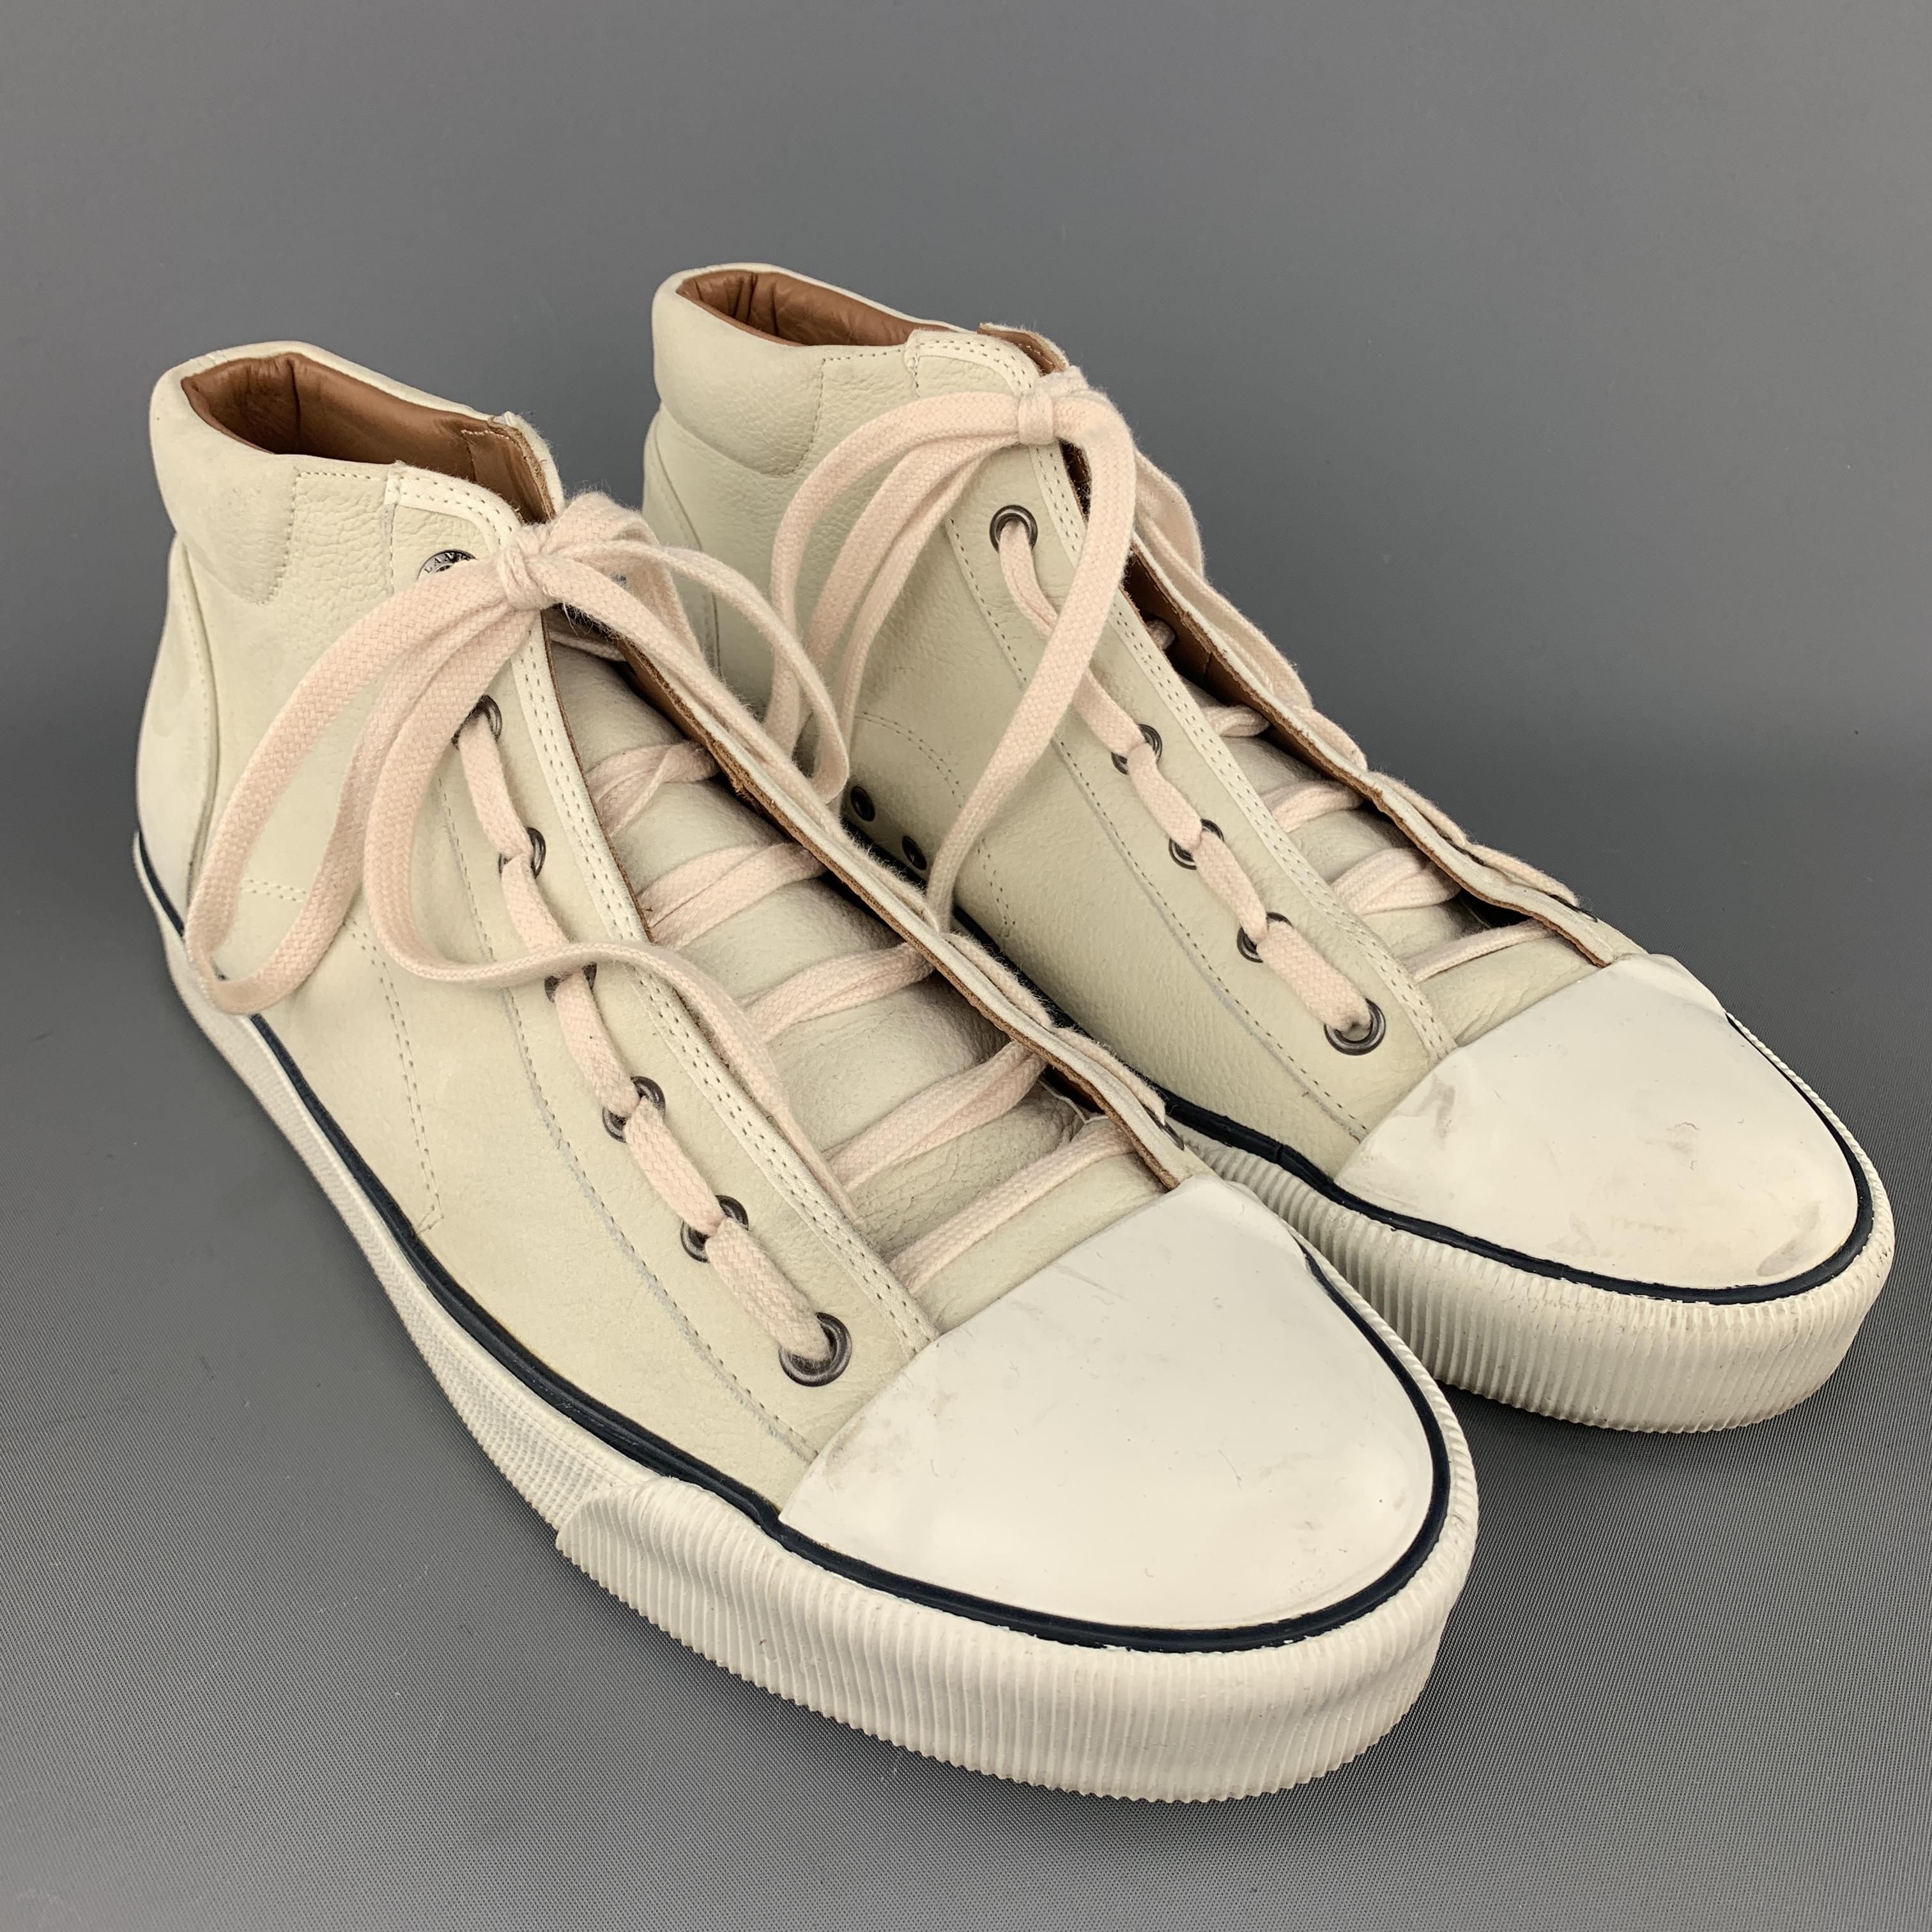 Lanvin sneakers come in creamy beige textured leather with a white rubber toe cap and pink laces. Made in Spain.
 

Very Good Pre-Owned Condition.
Marked: UK 10

Outsole: 12 x 4 in.